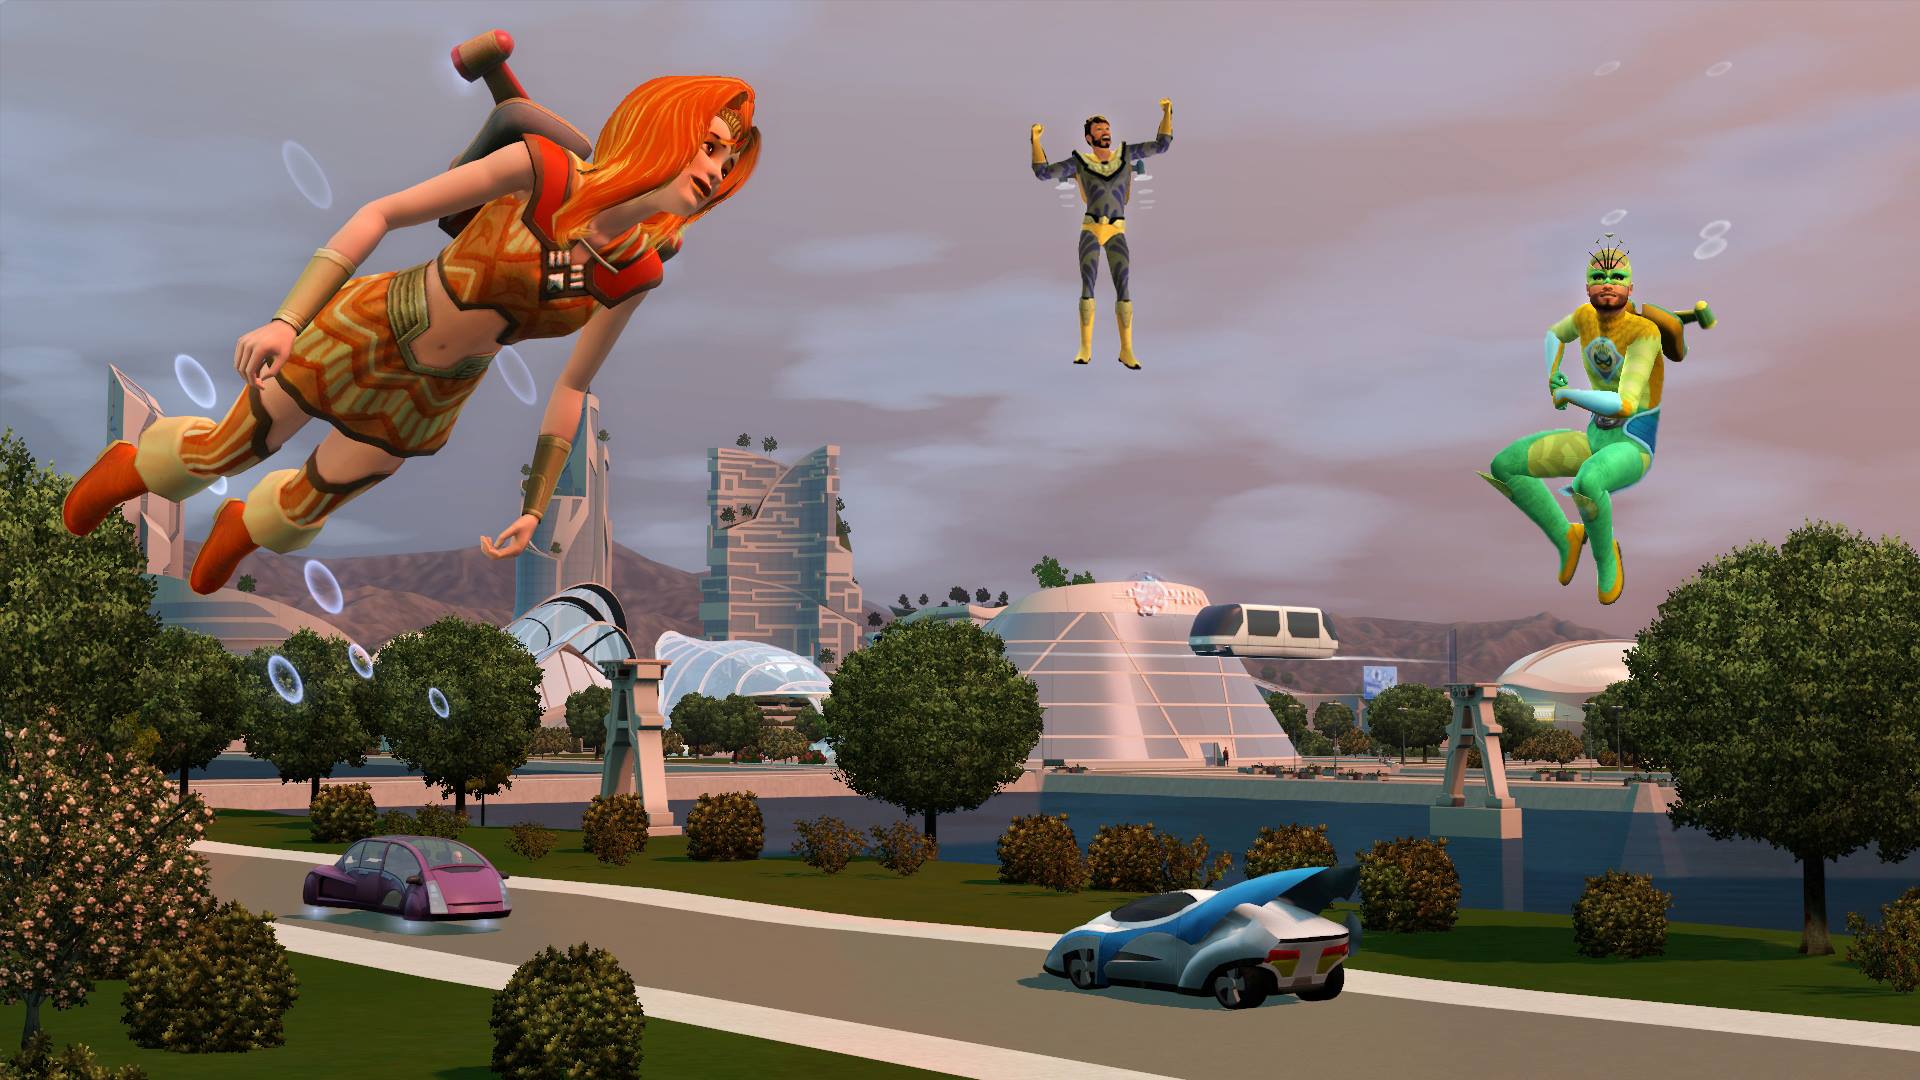 sims 3 into the future release date uk